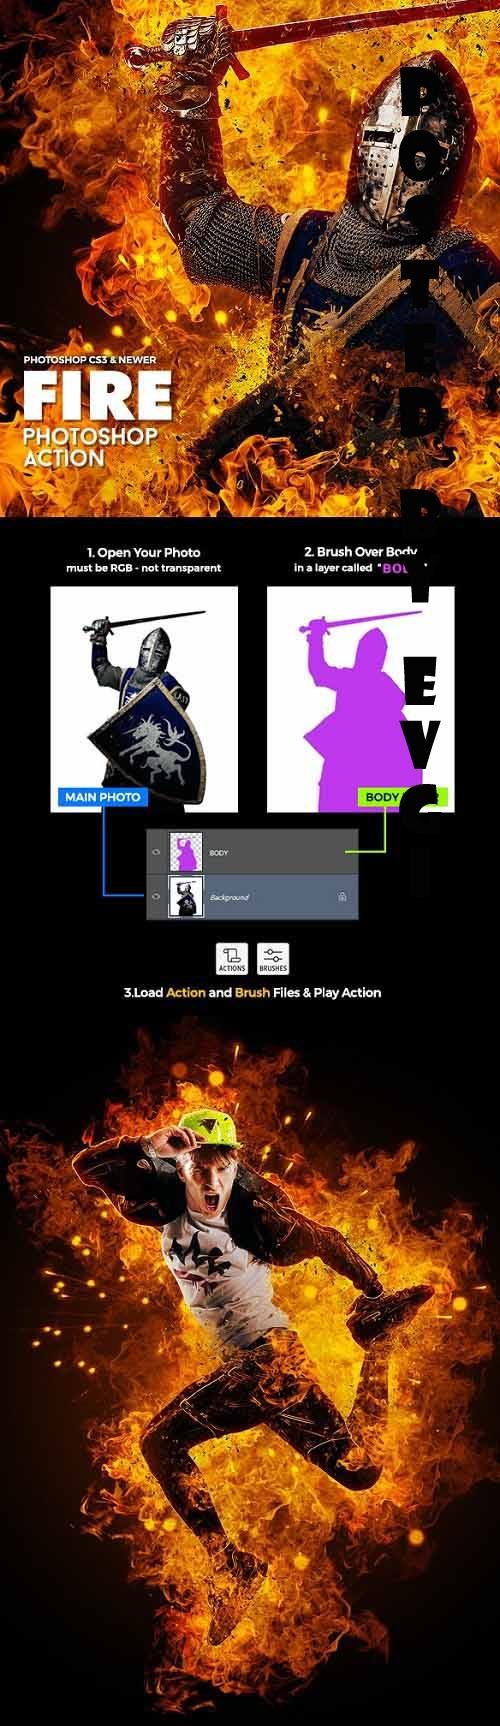 Fire Effect Photoshop Action - 35503232